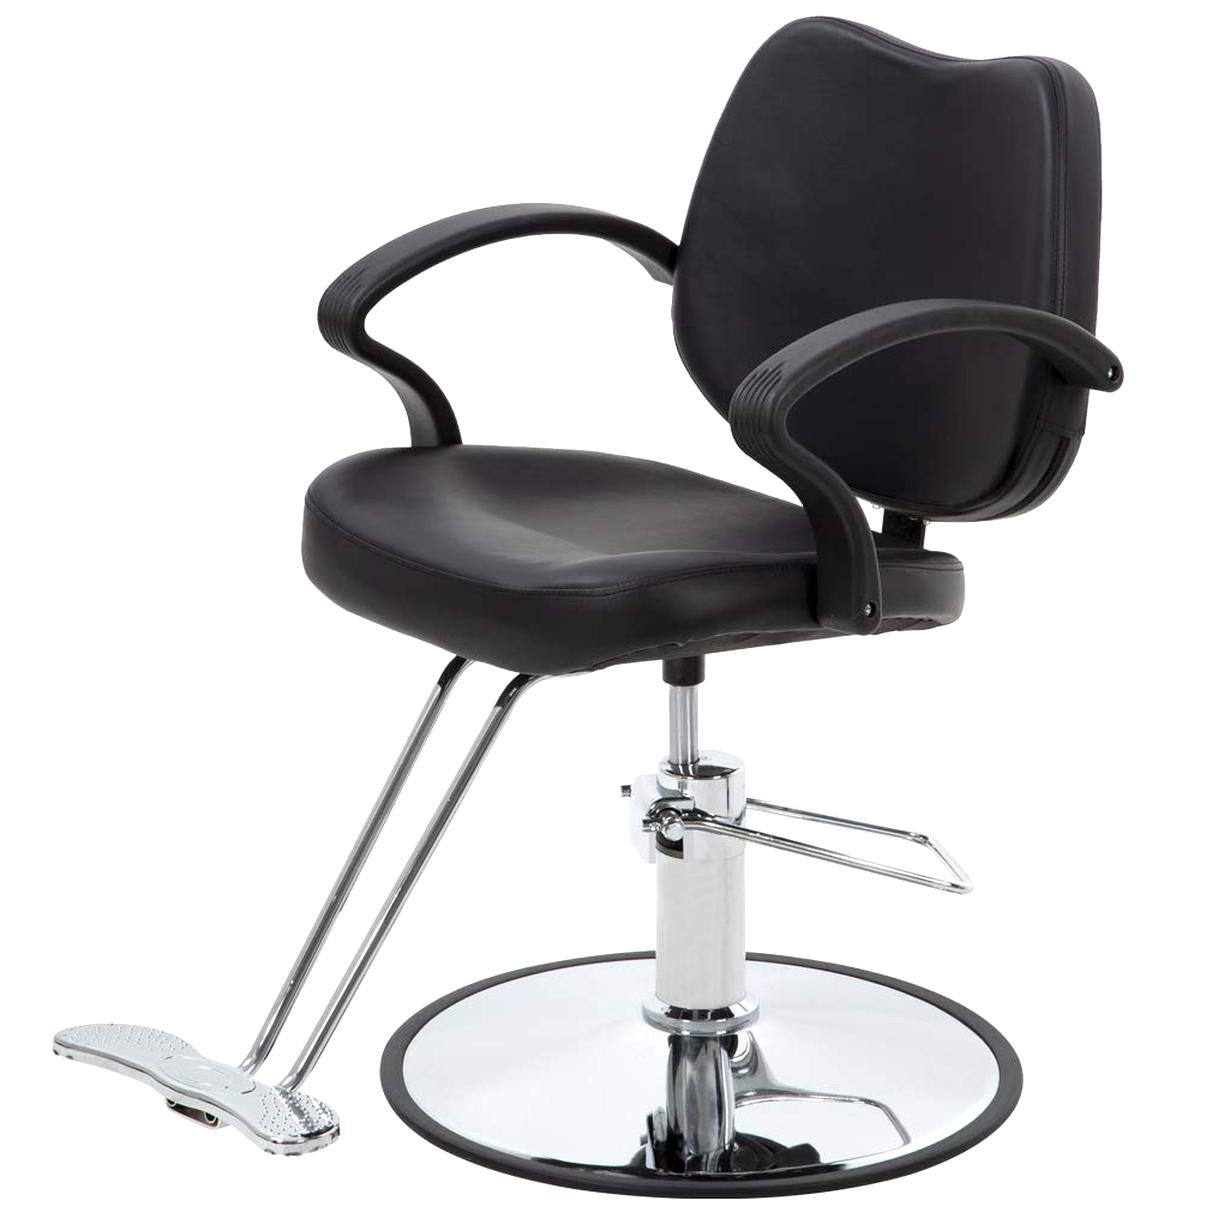 Salon Chairs For Sale In Uk 88 Second Hand Salon Chairs